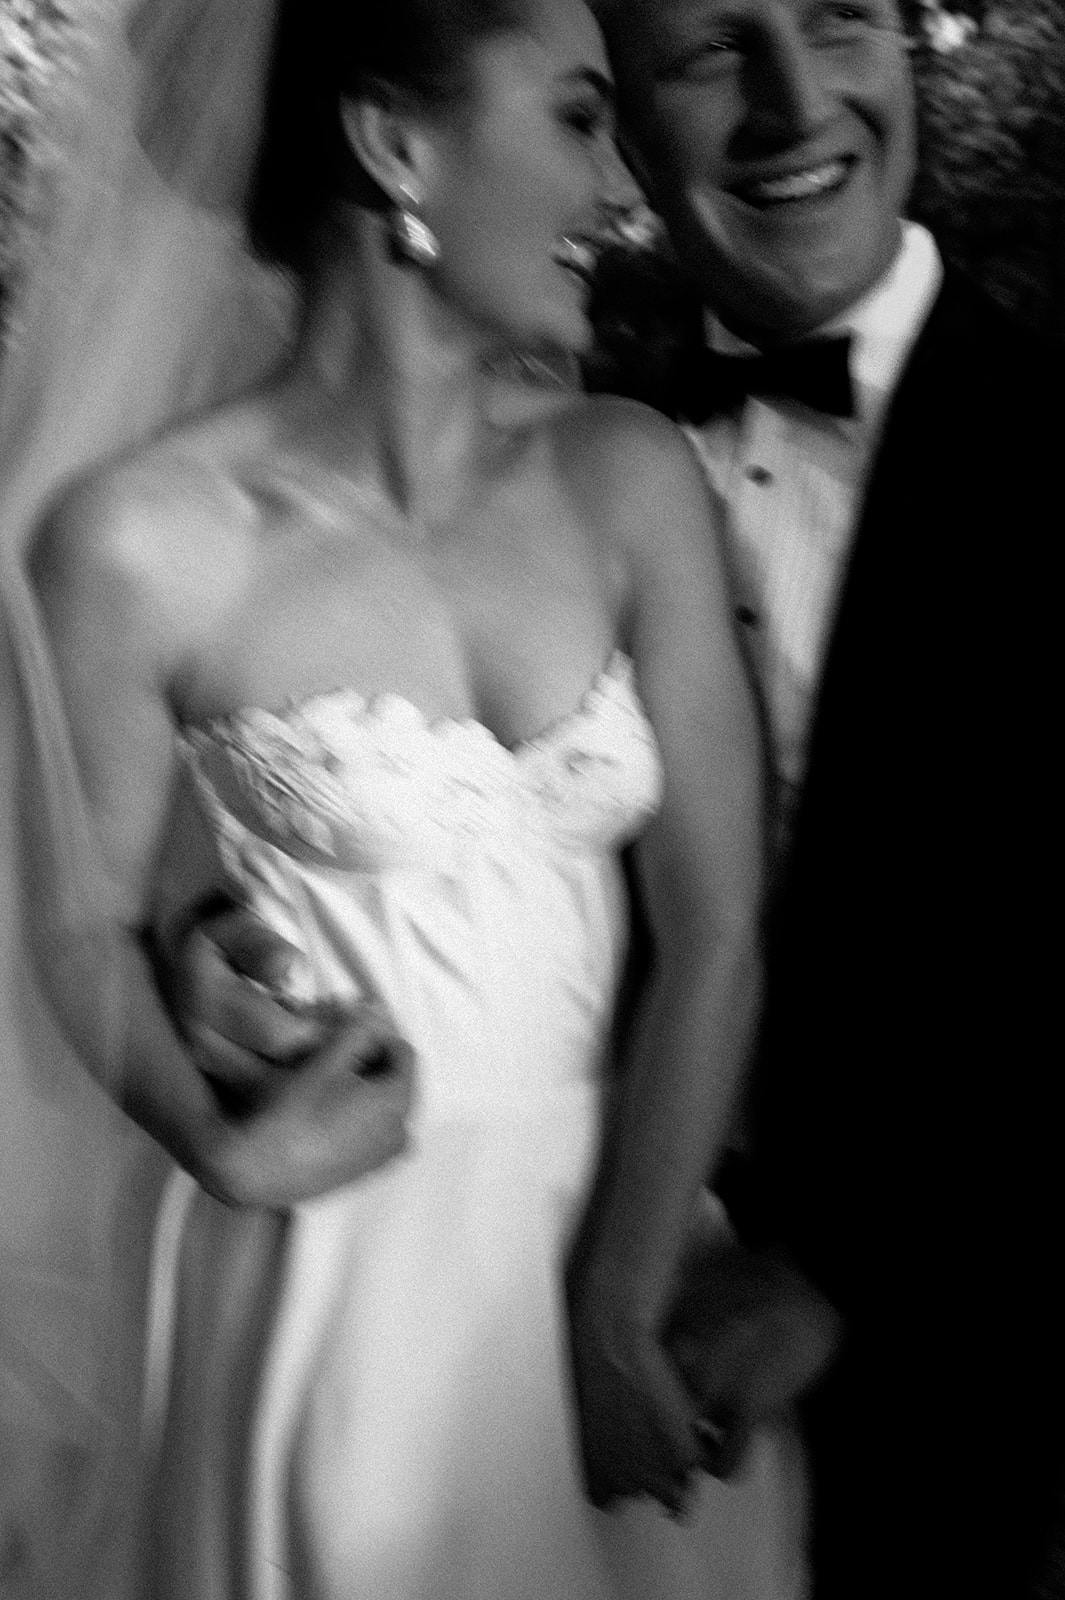 A black and white photo of a bride and groom. They are standing close together, smiling and laughing. The bride is wearing a strapless wedding gown and veil, while the groom is in a tuxedo with a bow tie. The image is slightly blurred, capturing a candid moment.